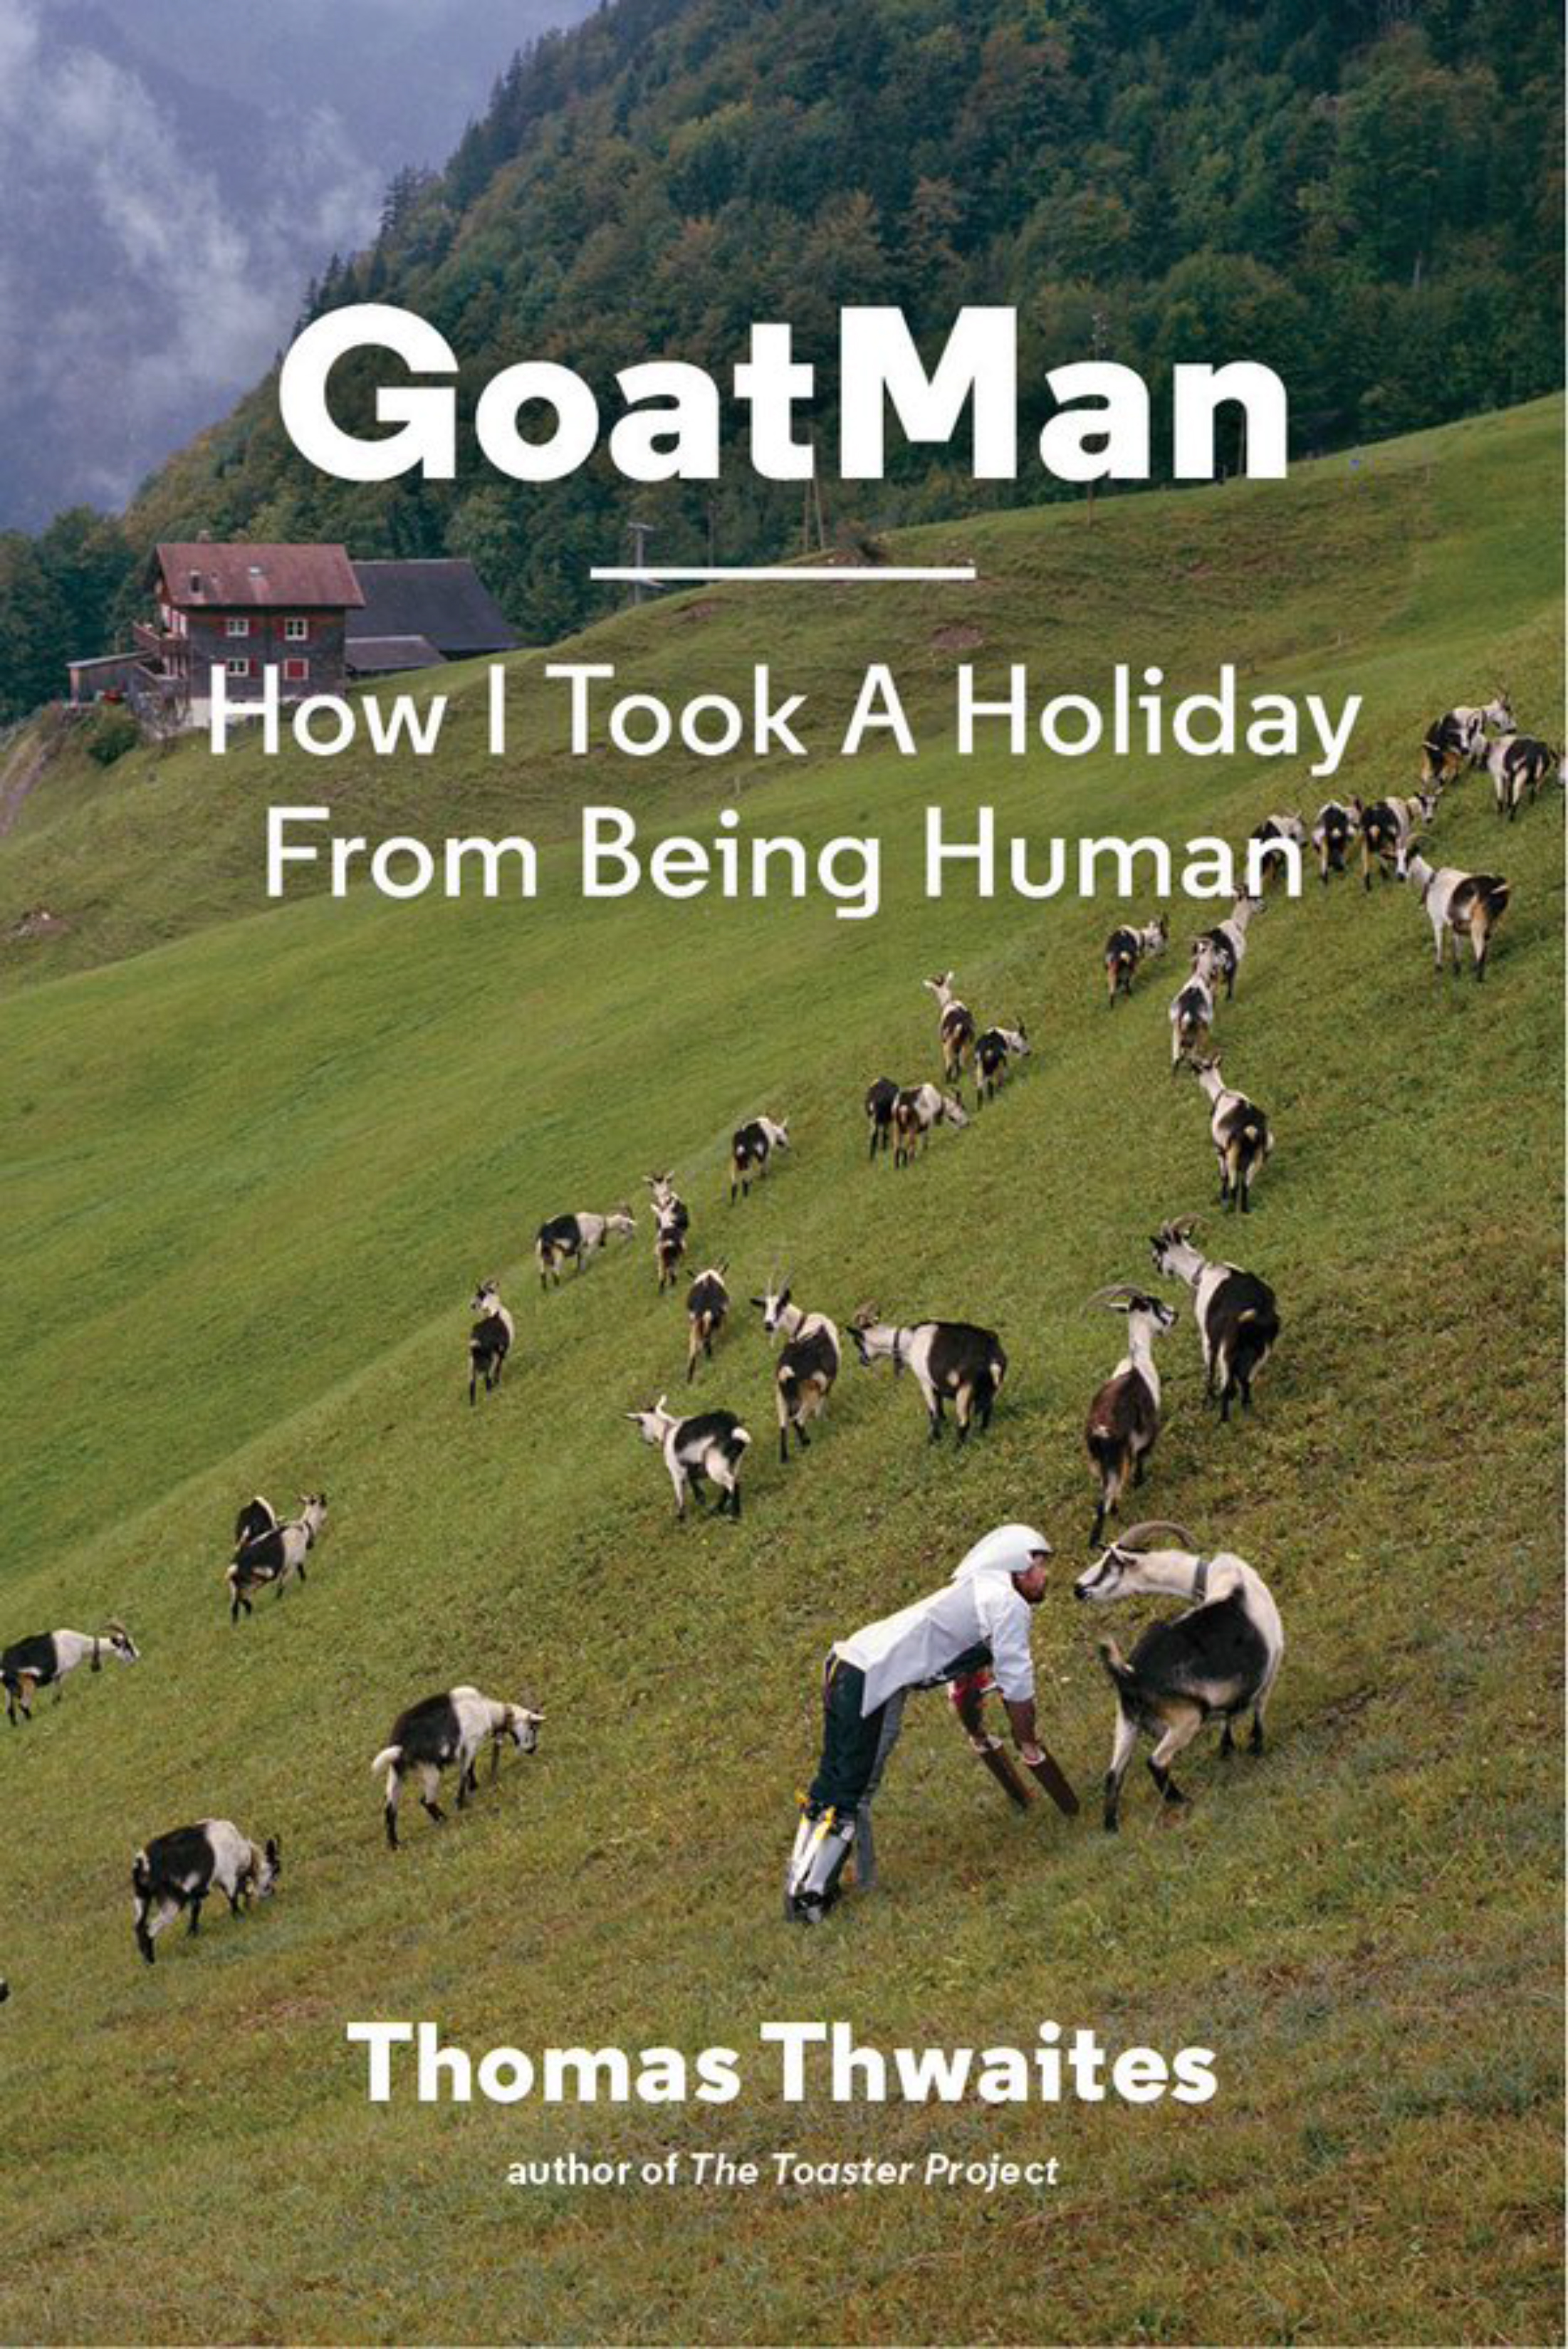 GoatMan: How I Took a Holiday from Being a Human by Thomas Thwaites Princeton Architectural Press, 2016